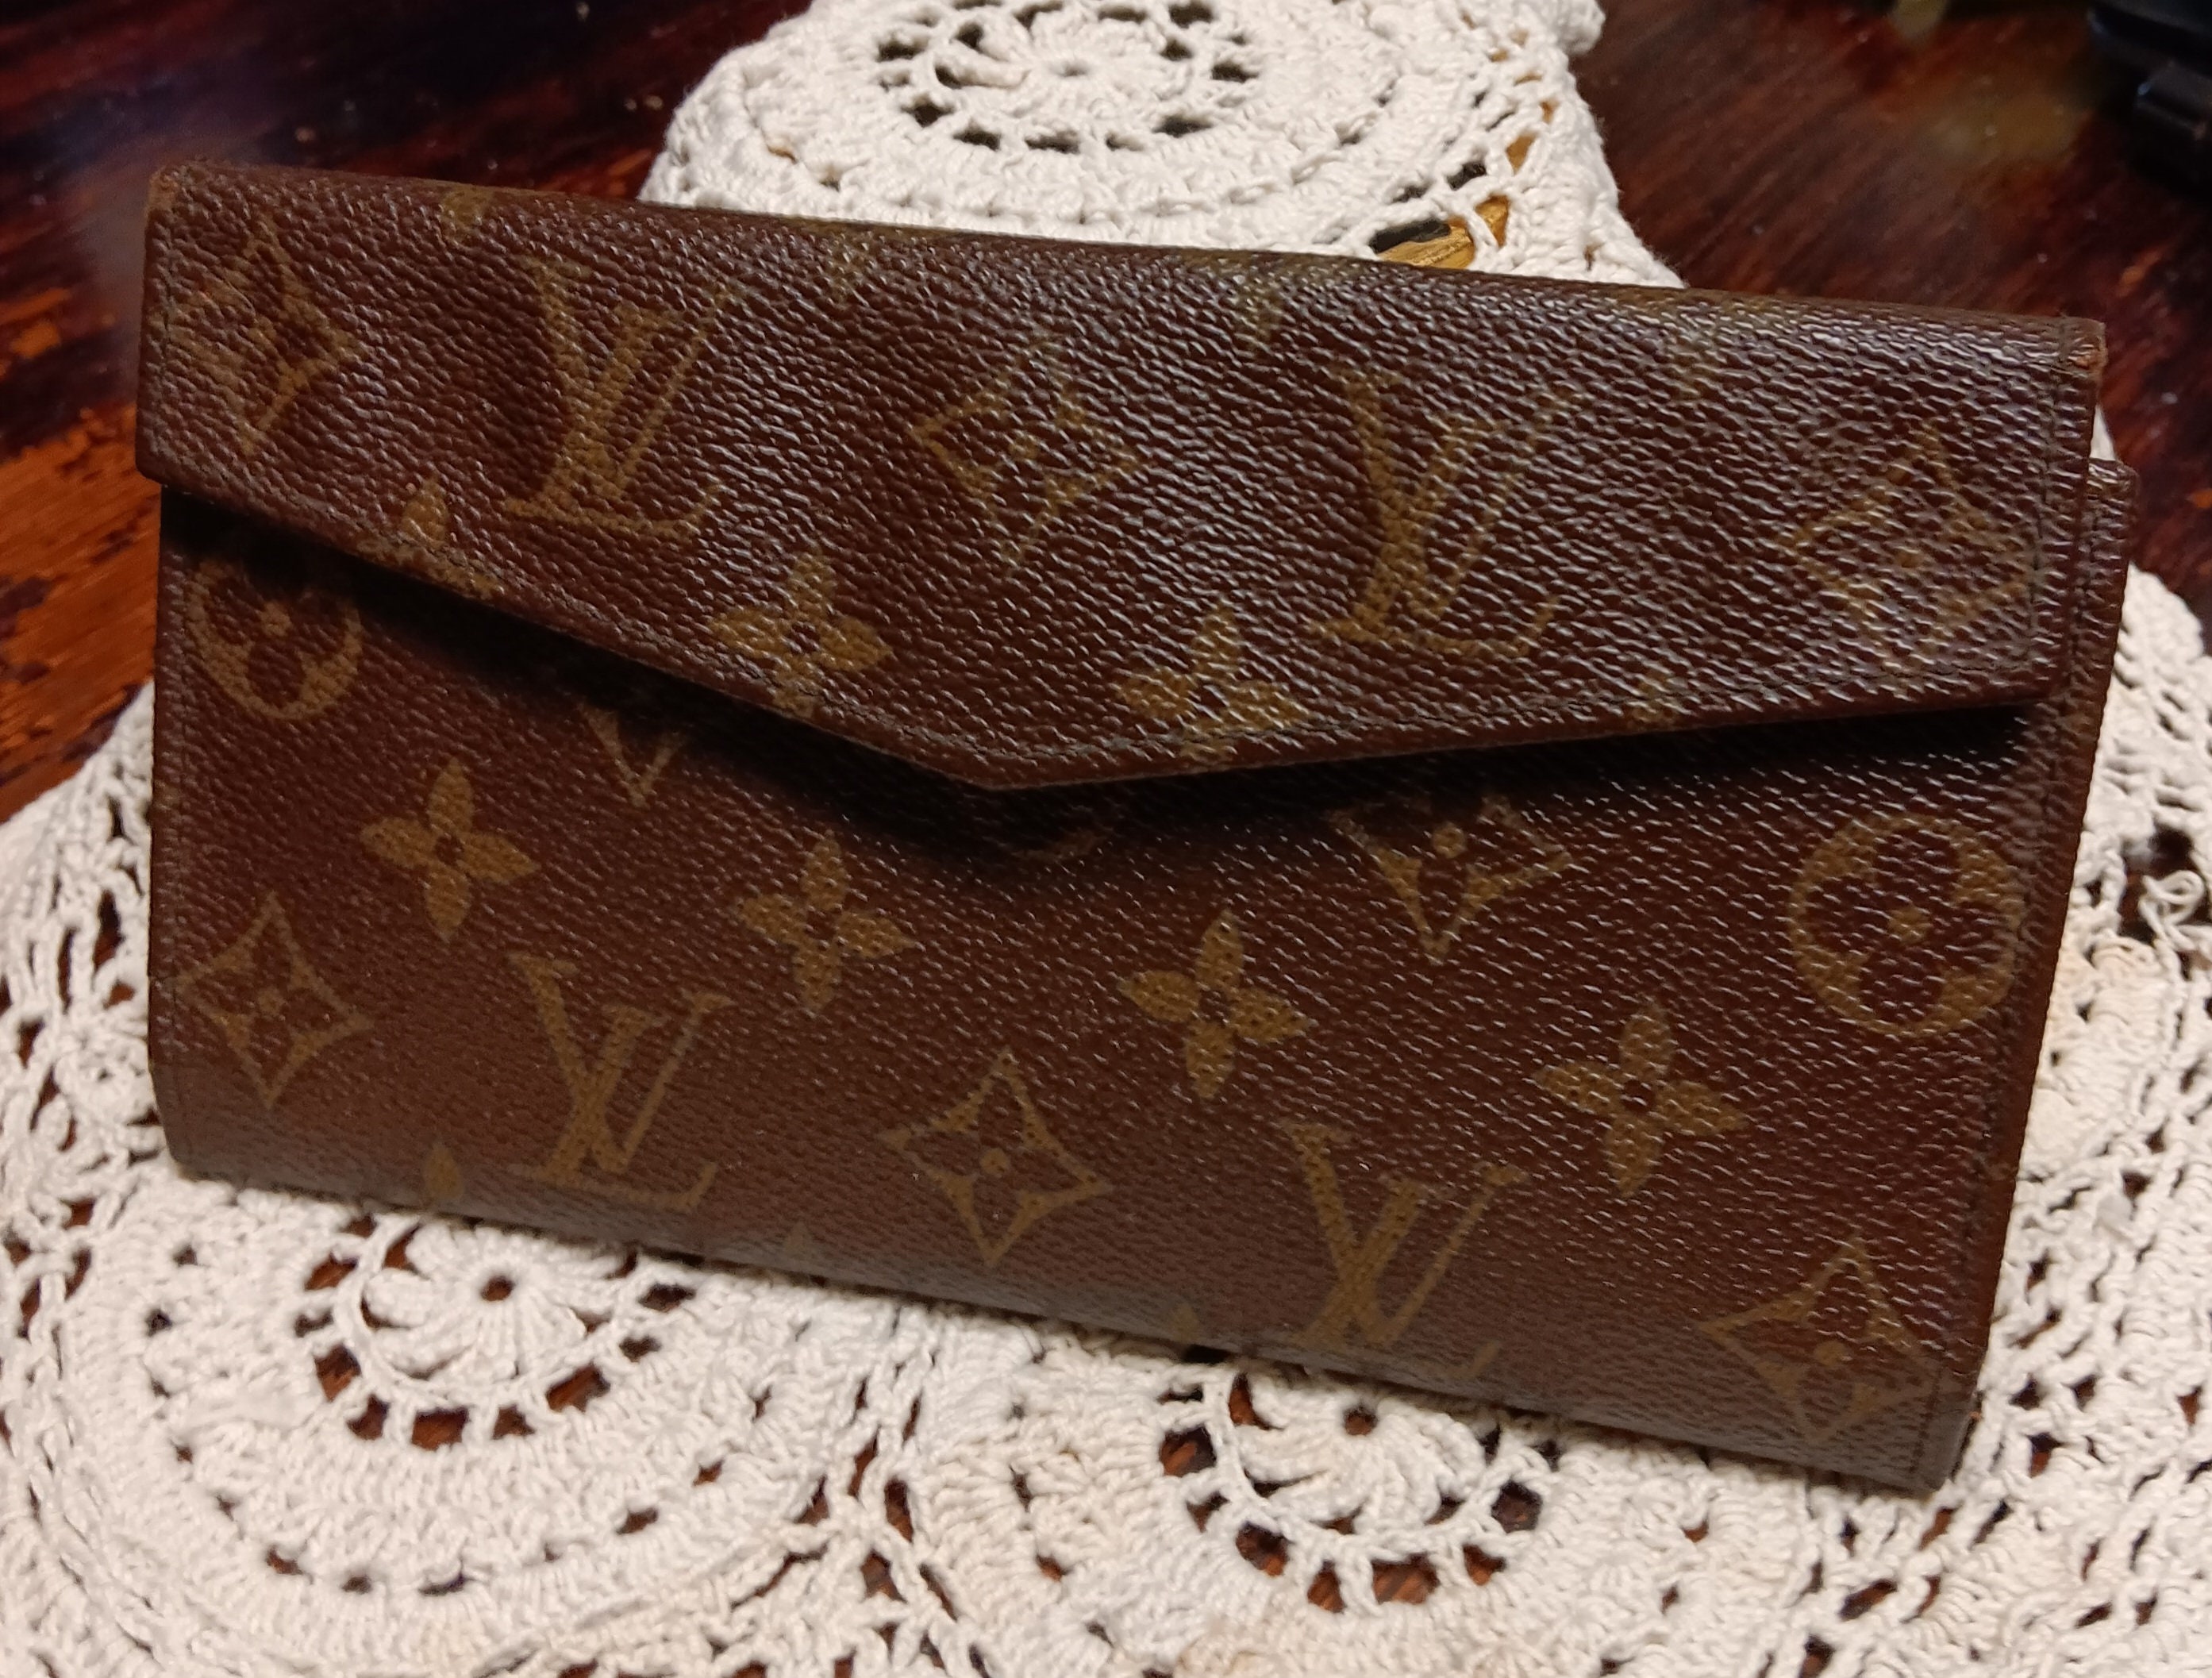 Musette Tango Upcycled  Louis vuitton purse, Upcycled handbag